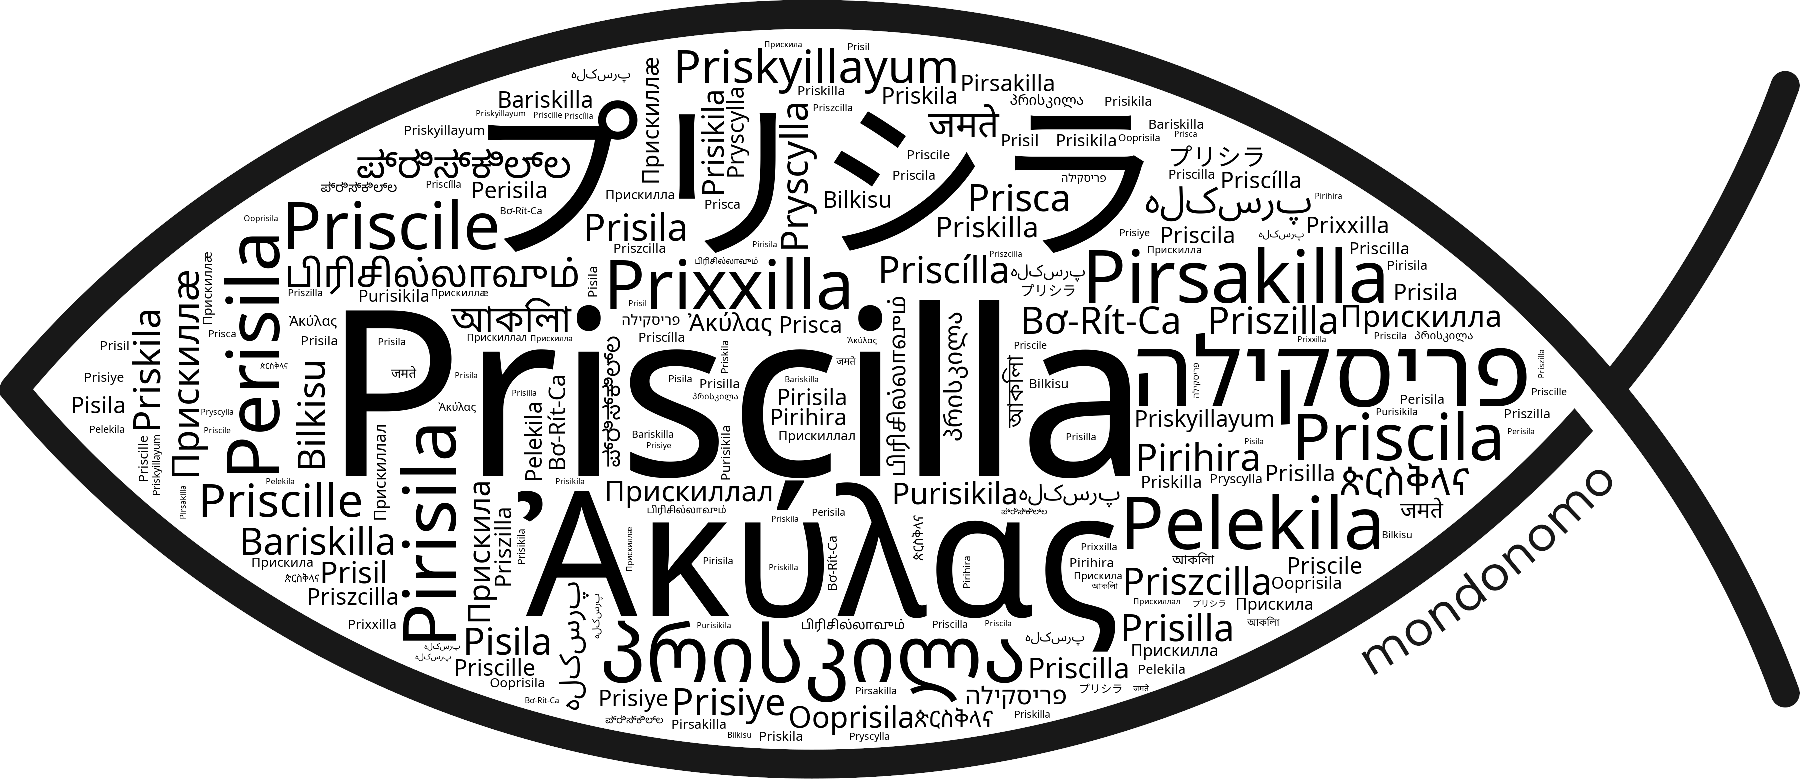 Name Priscilla in the world's Bibles